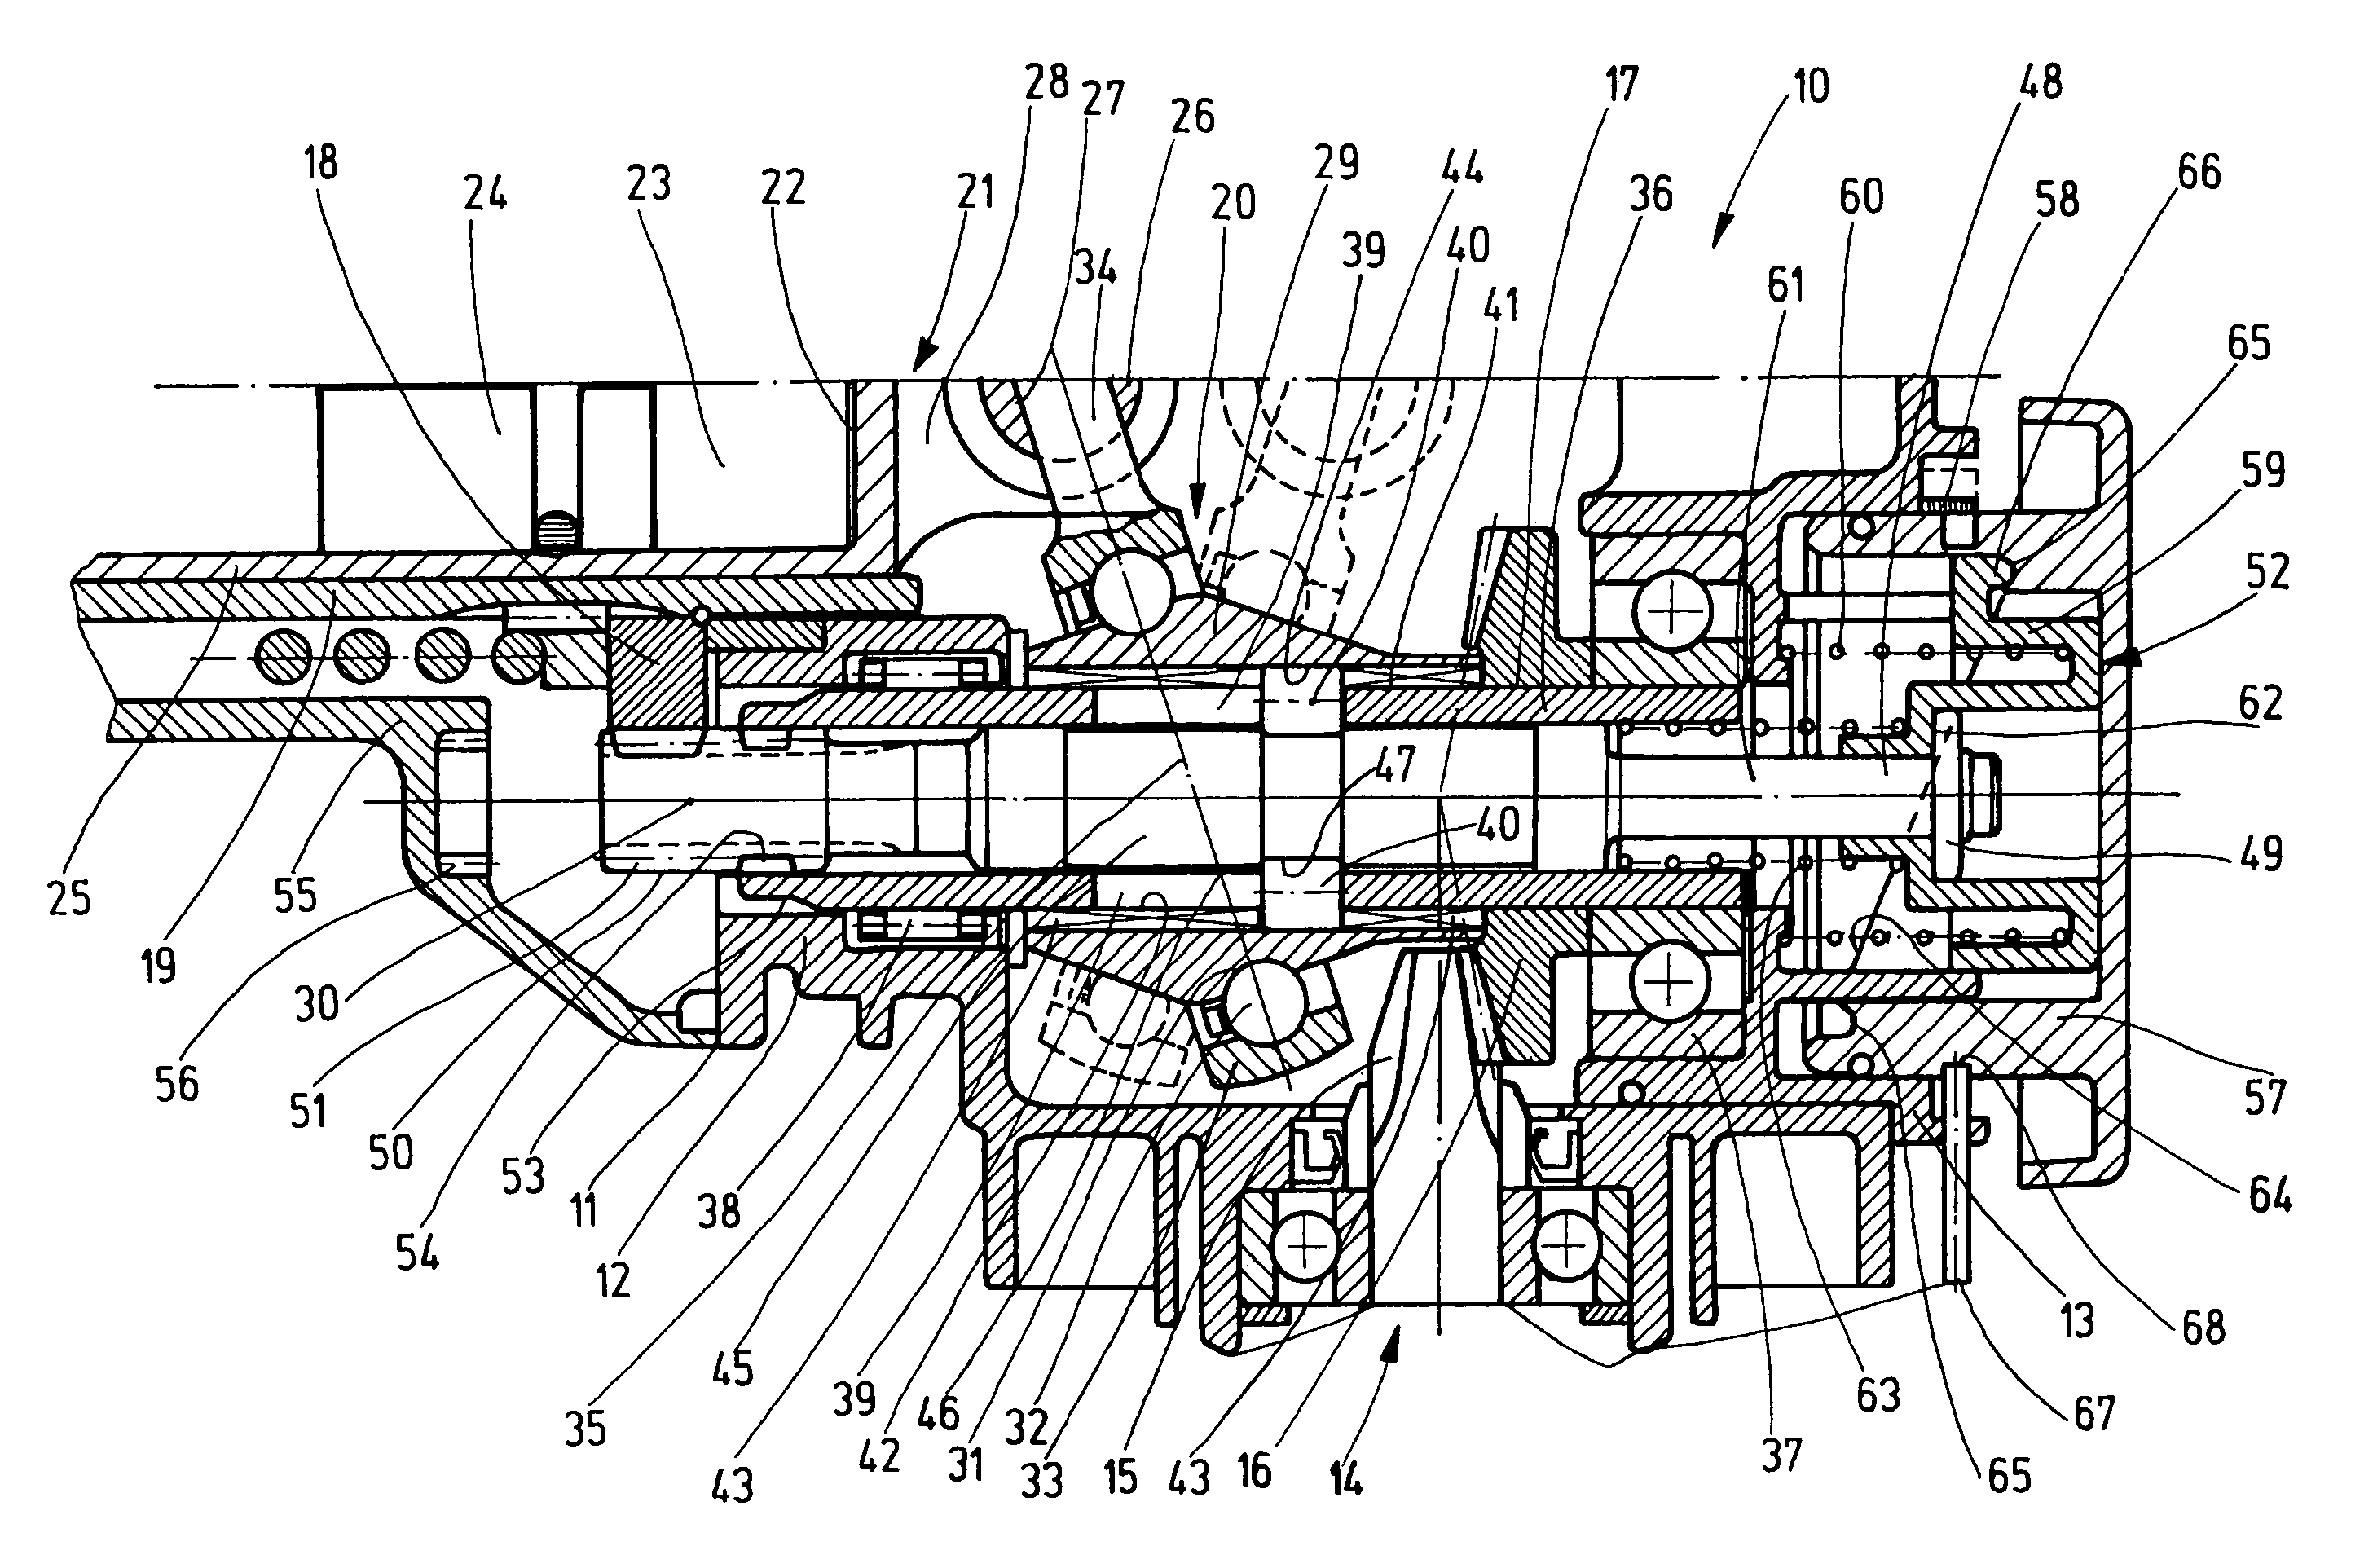 Hammer drill with wobble mechanism and hollow drive shaft